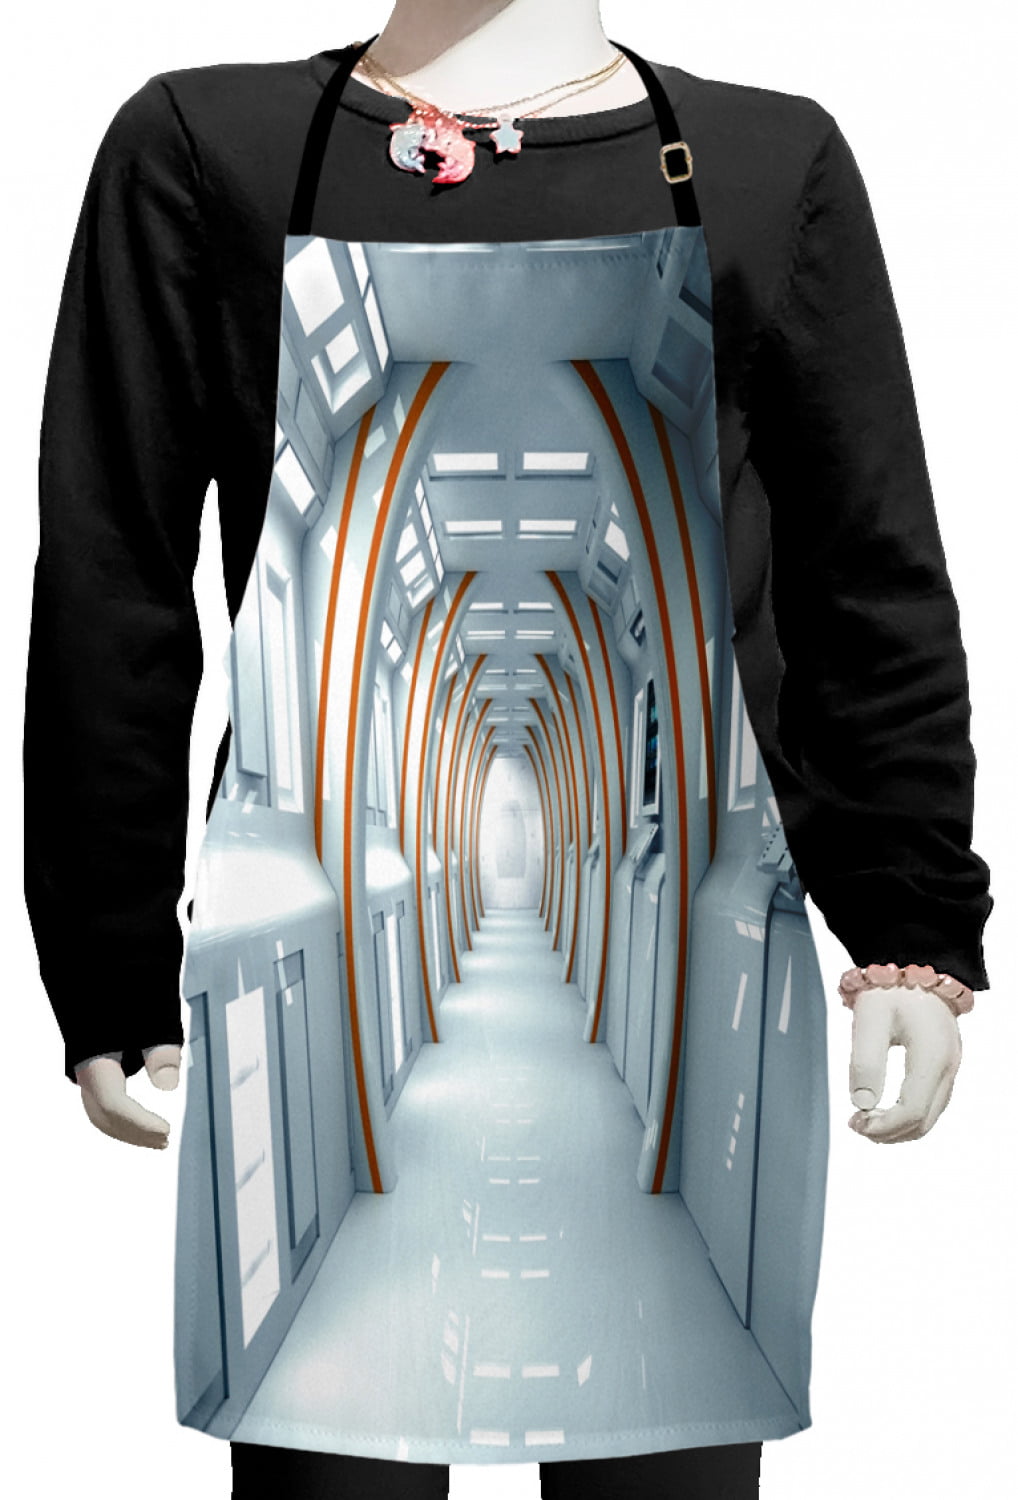 futuristic clothing for kids